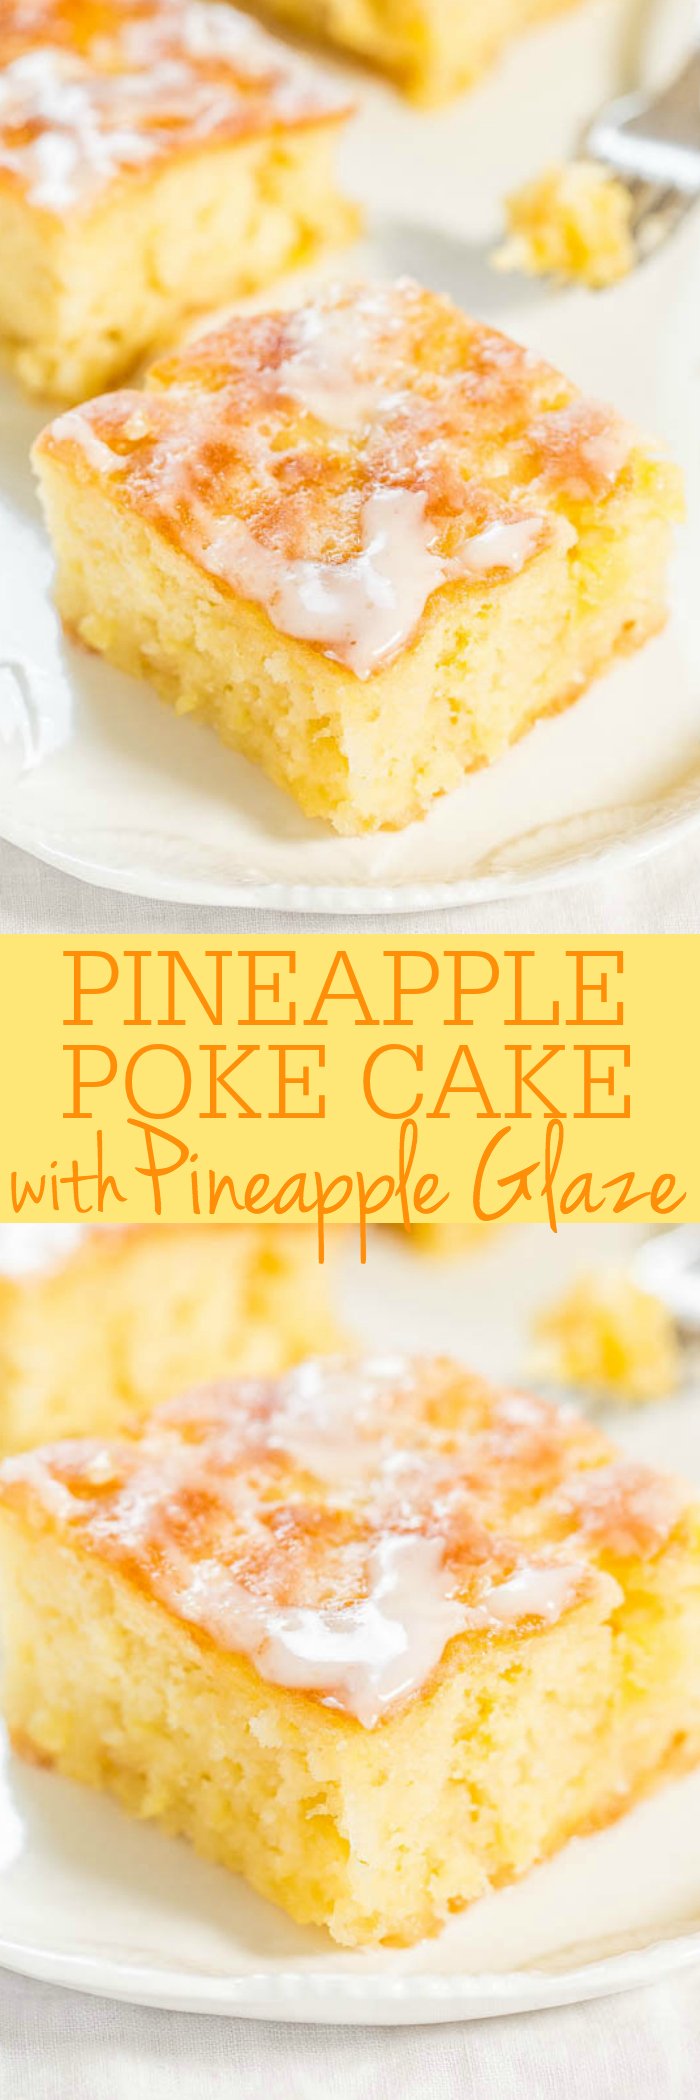 Crushed Pineapple Cake — This pineapple cake is an easy, from-scratch poke cake recipe! It's screaming with pineapple flavor from the crushed pineapple in the cake and the pineapple juice in the glaze.